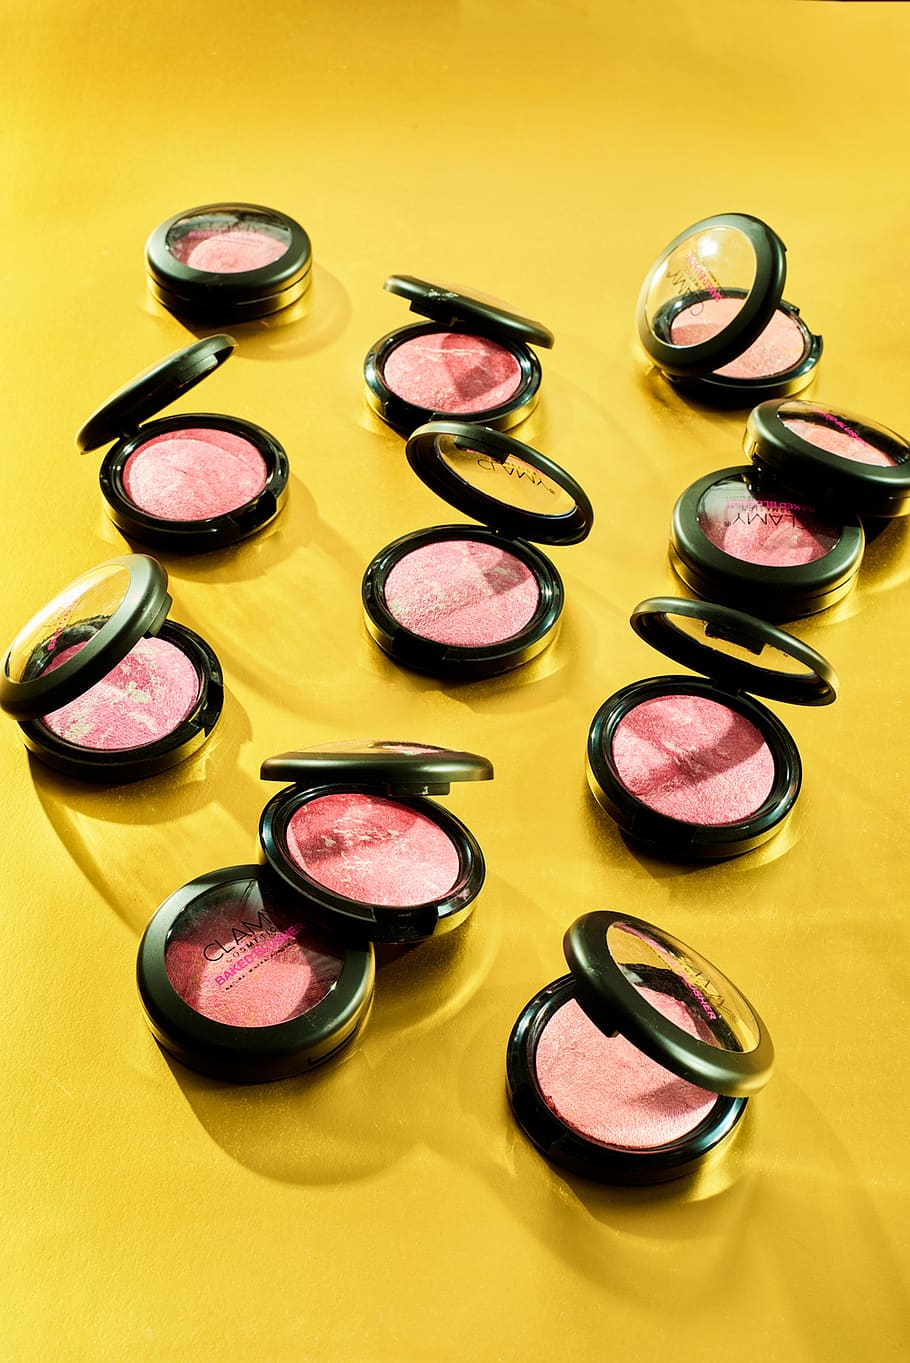 clamy blusher, clamy cosmetics, clamy makeup, blusher conceptual shoot, best blusher photograph, scattered makeup blushers, multi colored, variation, indoors, choice